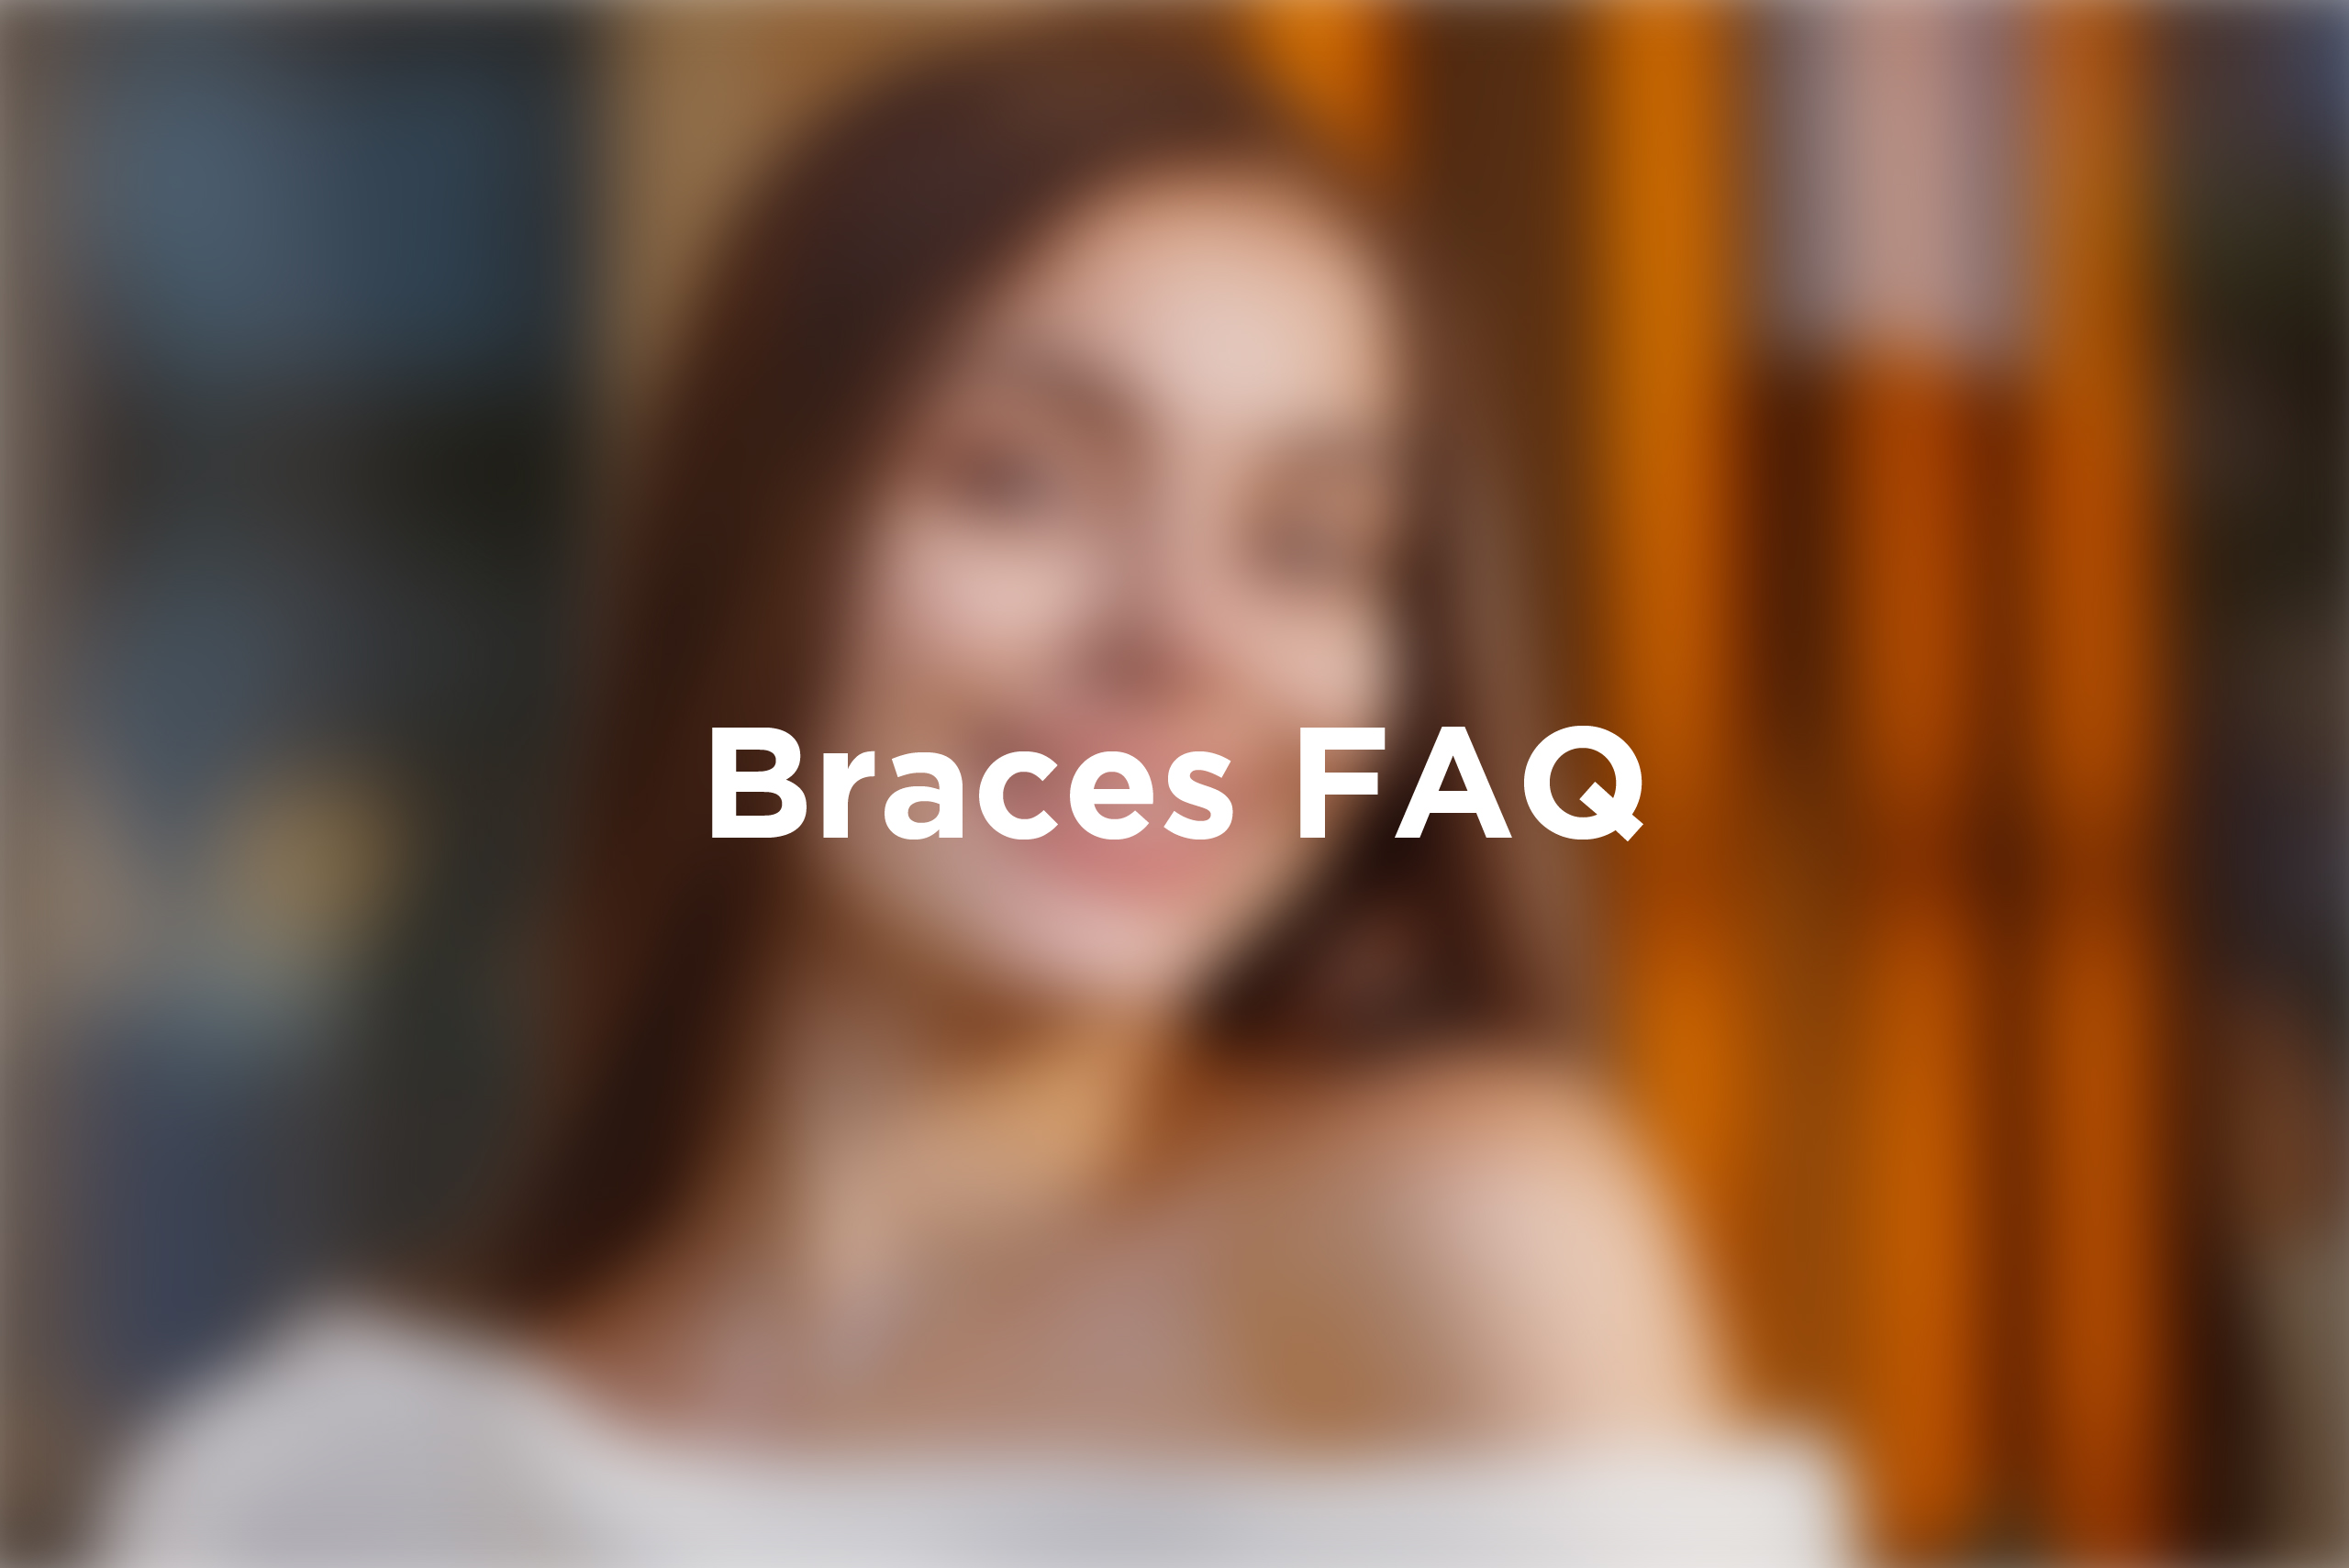 Braces FAQ Frequently asked questions